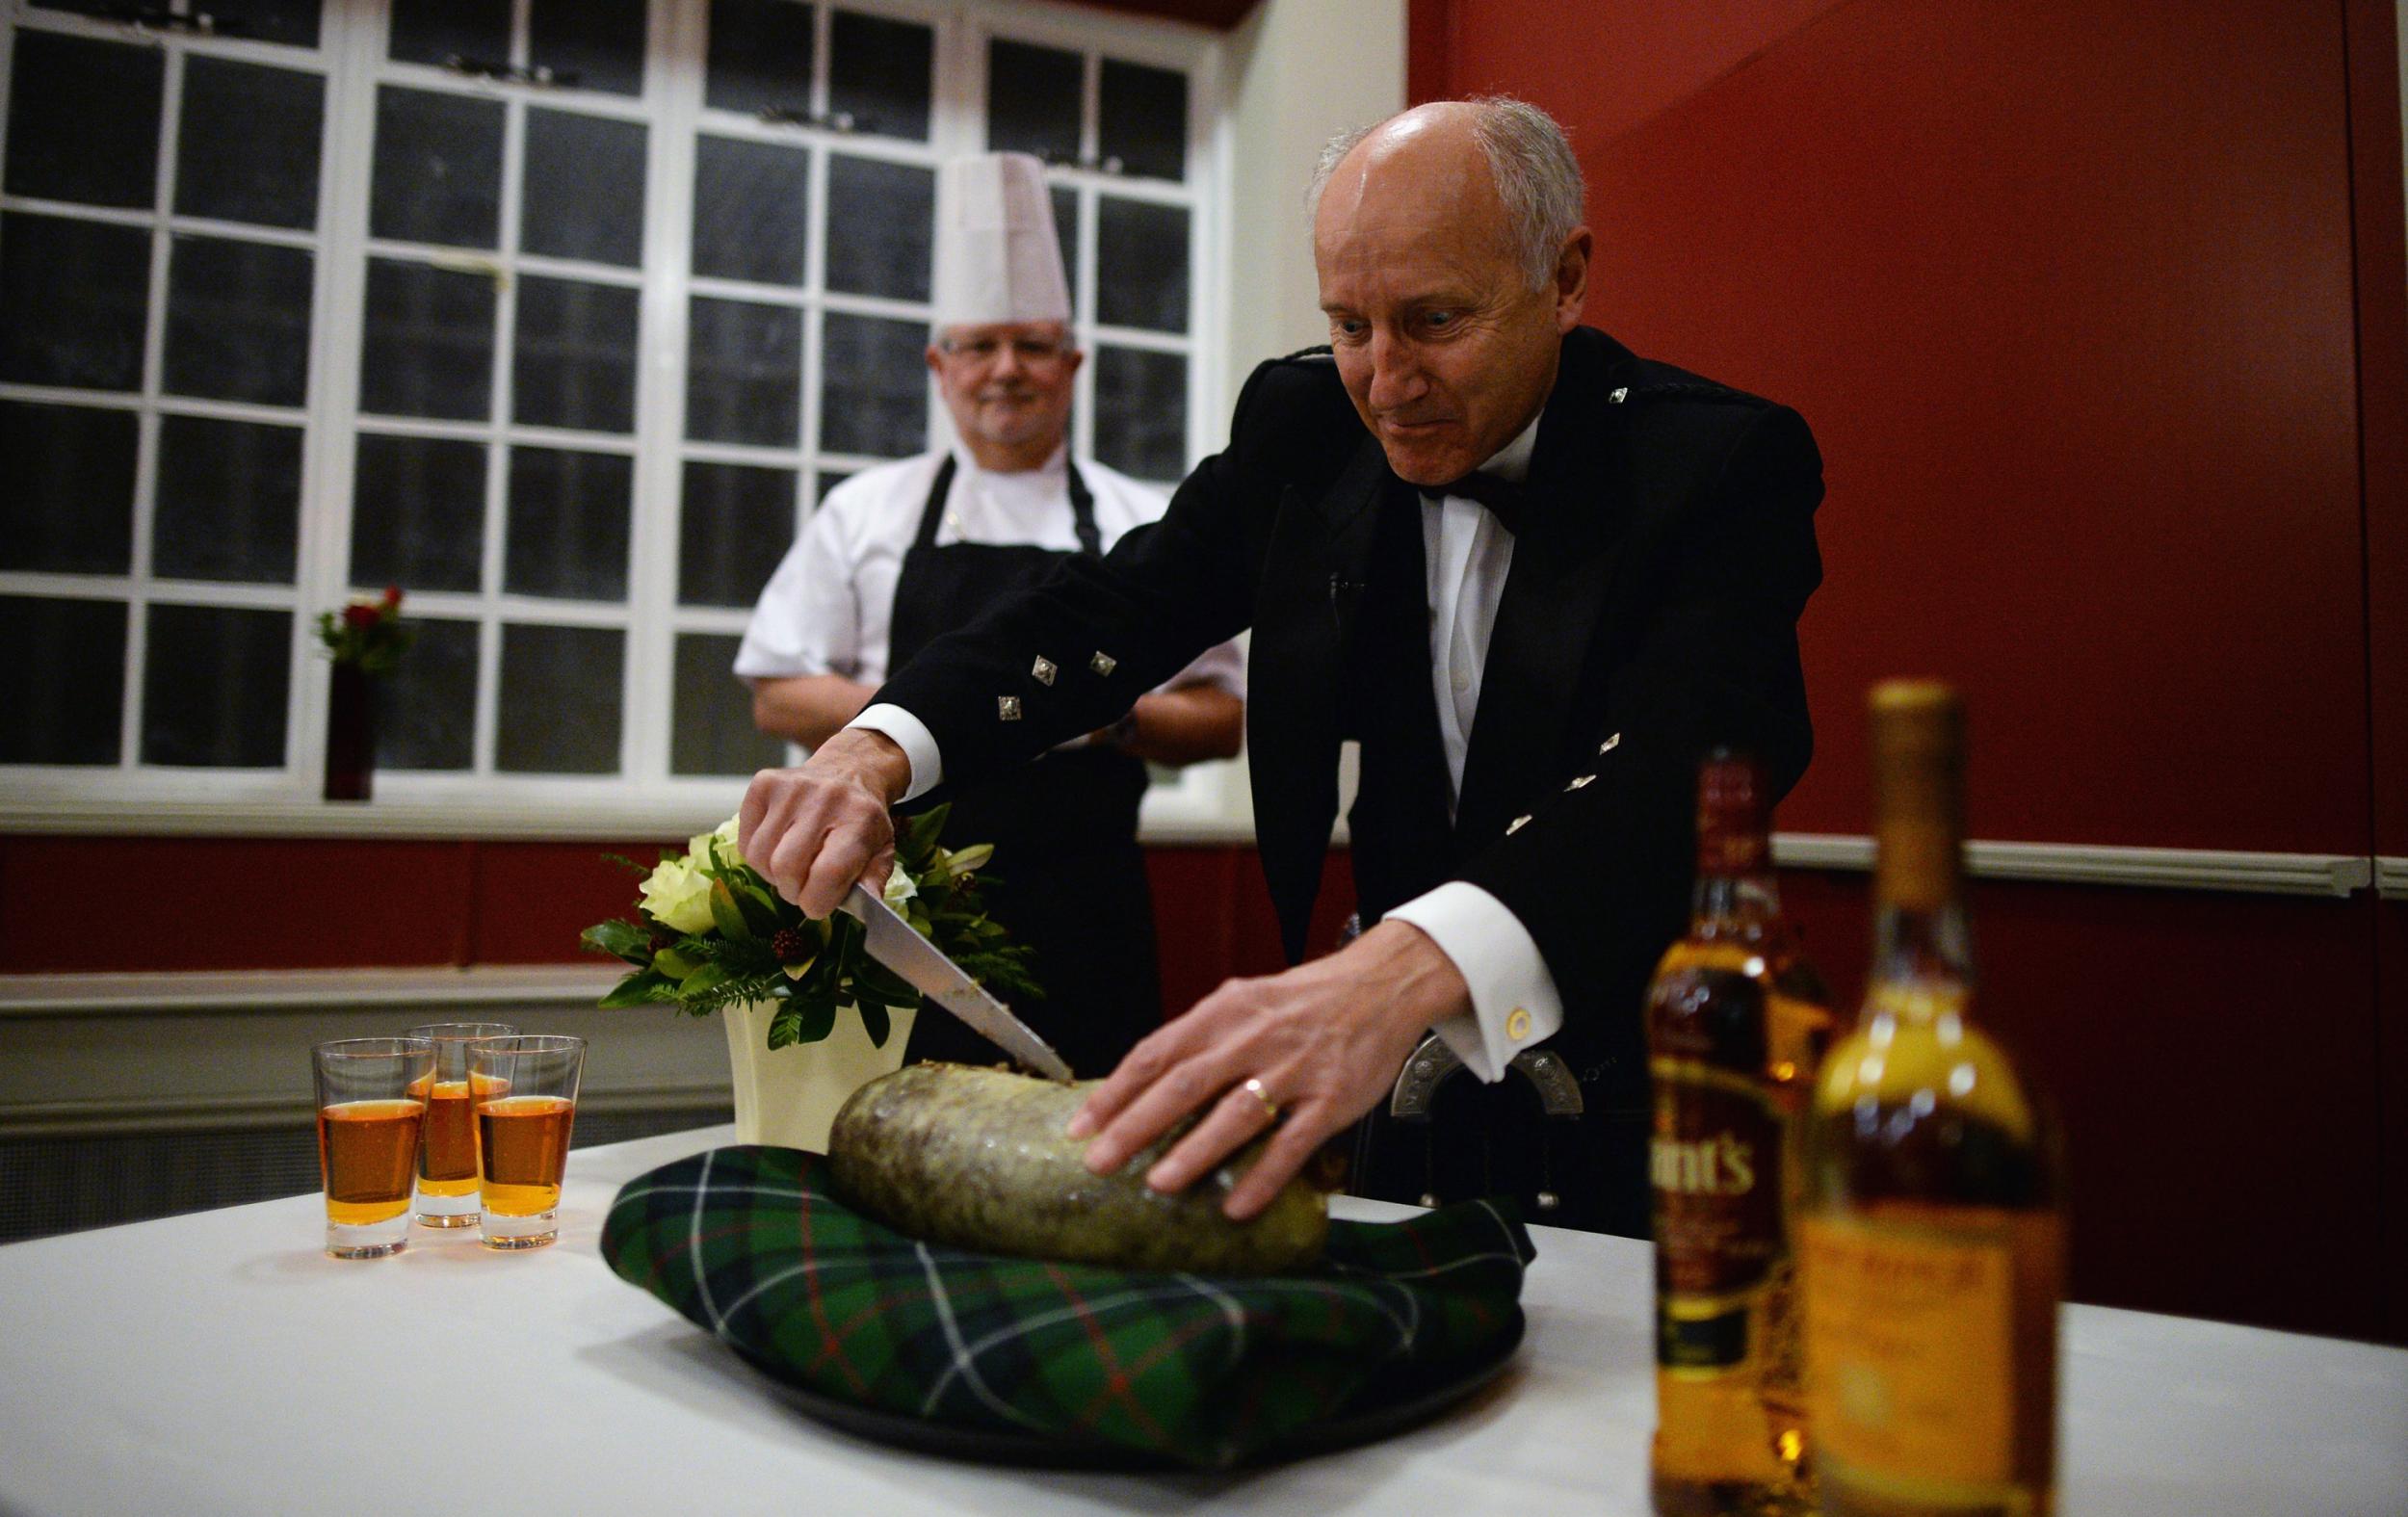 Cutting the haggis at Burns Night celebrations in Alloway, where the poet was born (Jeff J Mitchell/Getty)